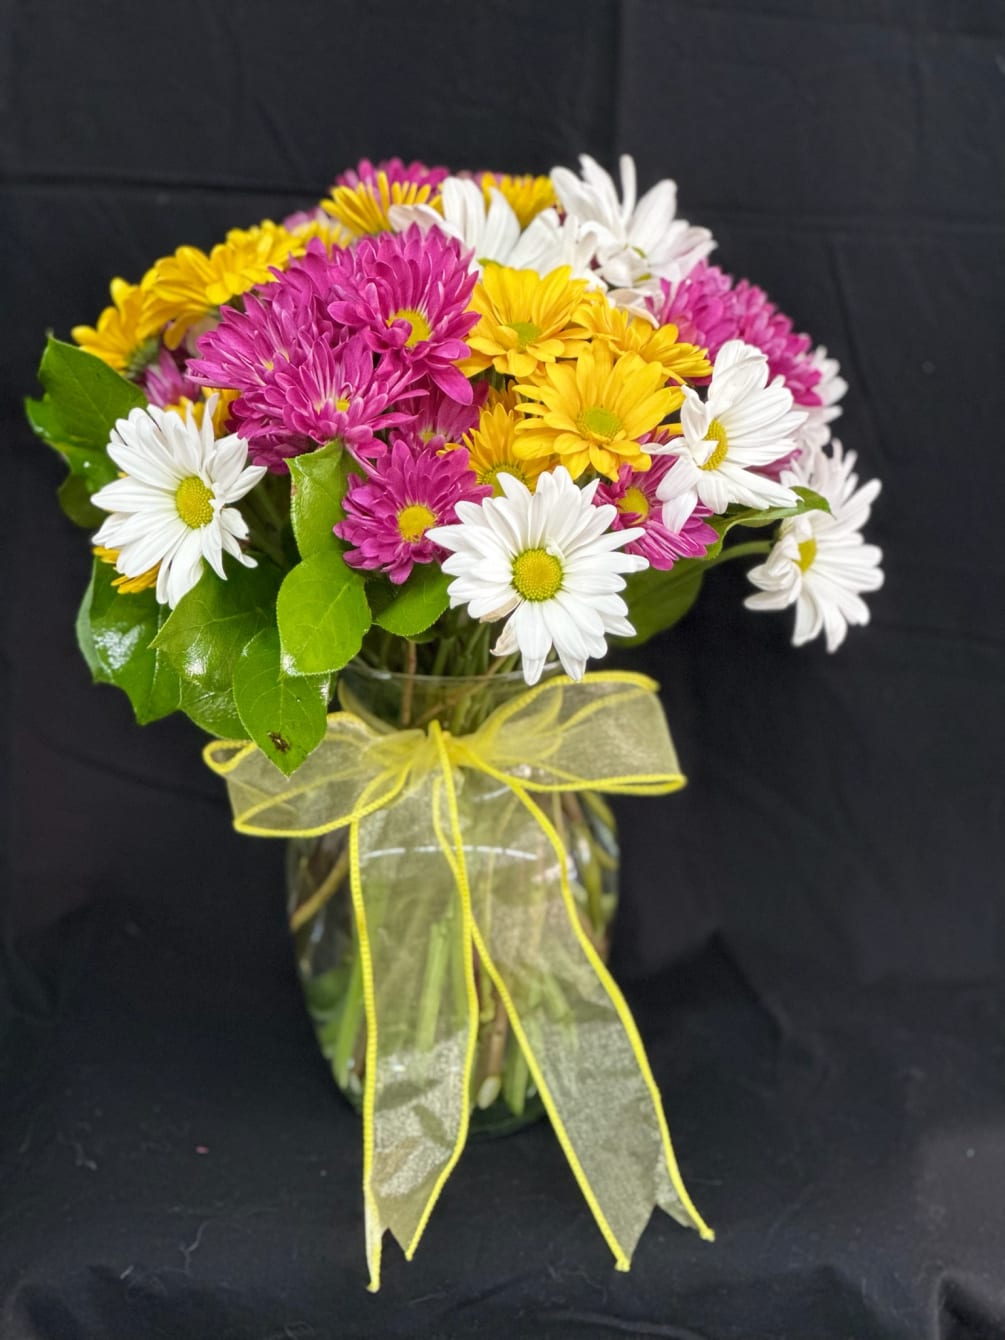 Perfect for the daisy lover!! Just daisies, in a variety of colors.